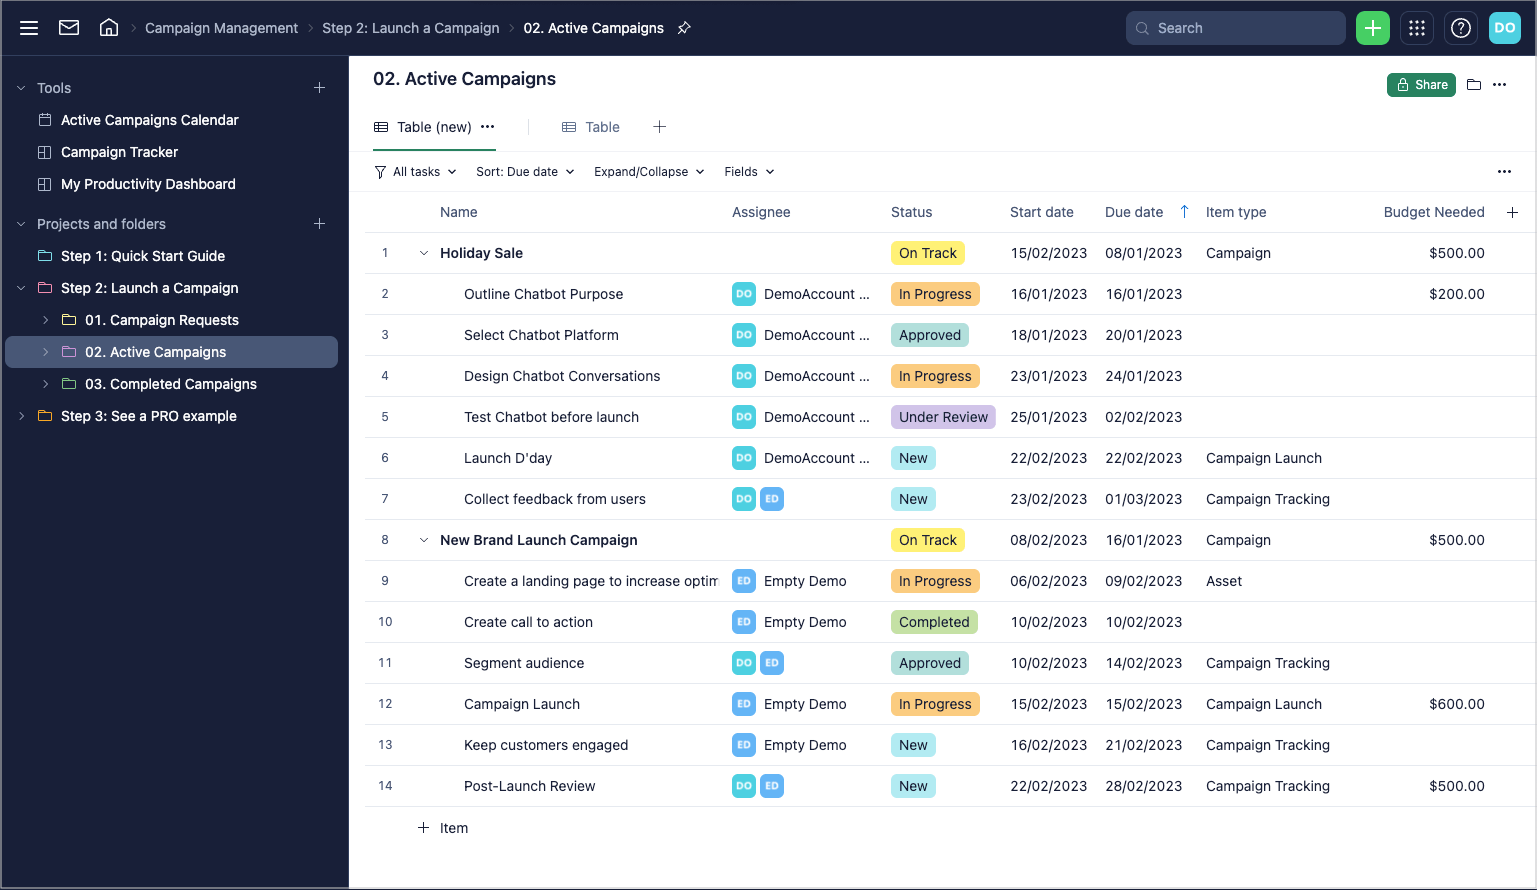 A detailed view of a marketing campaign management template featuring sections for campaign requests, active campaigns, and completed campaigns including a step-by-step guide for launching a campaign, with tasks such as selecting a chatbot platform, designing conversations, testing, launching, and collecting feedback